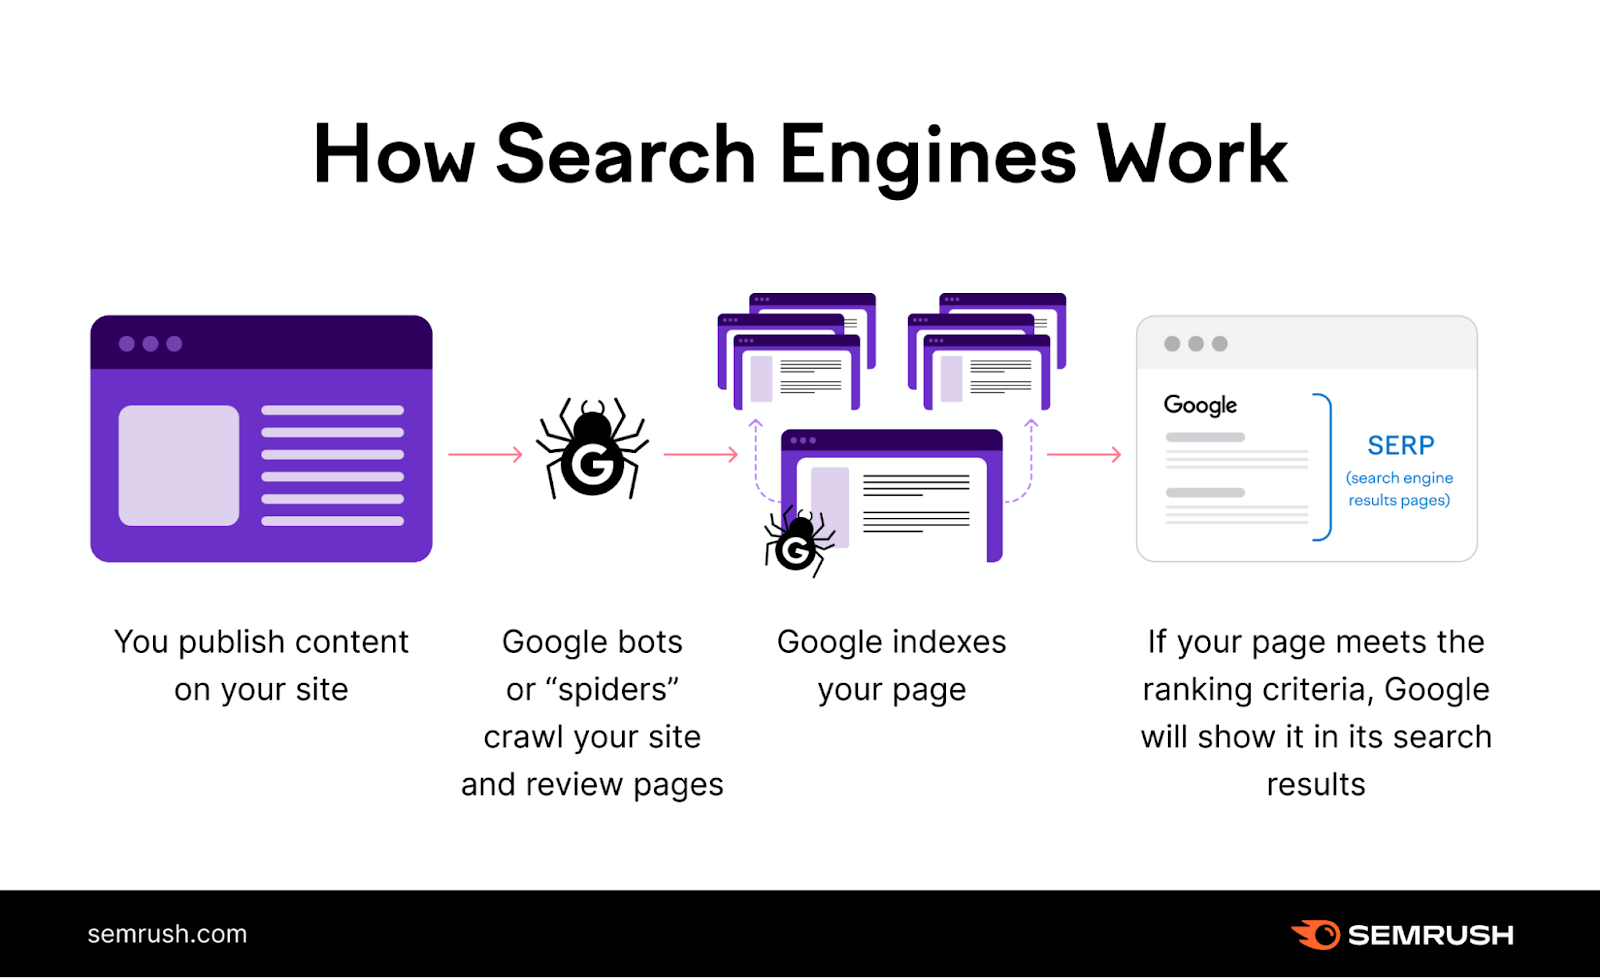 A visual showing how search engines work